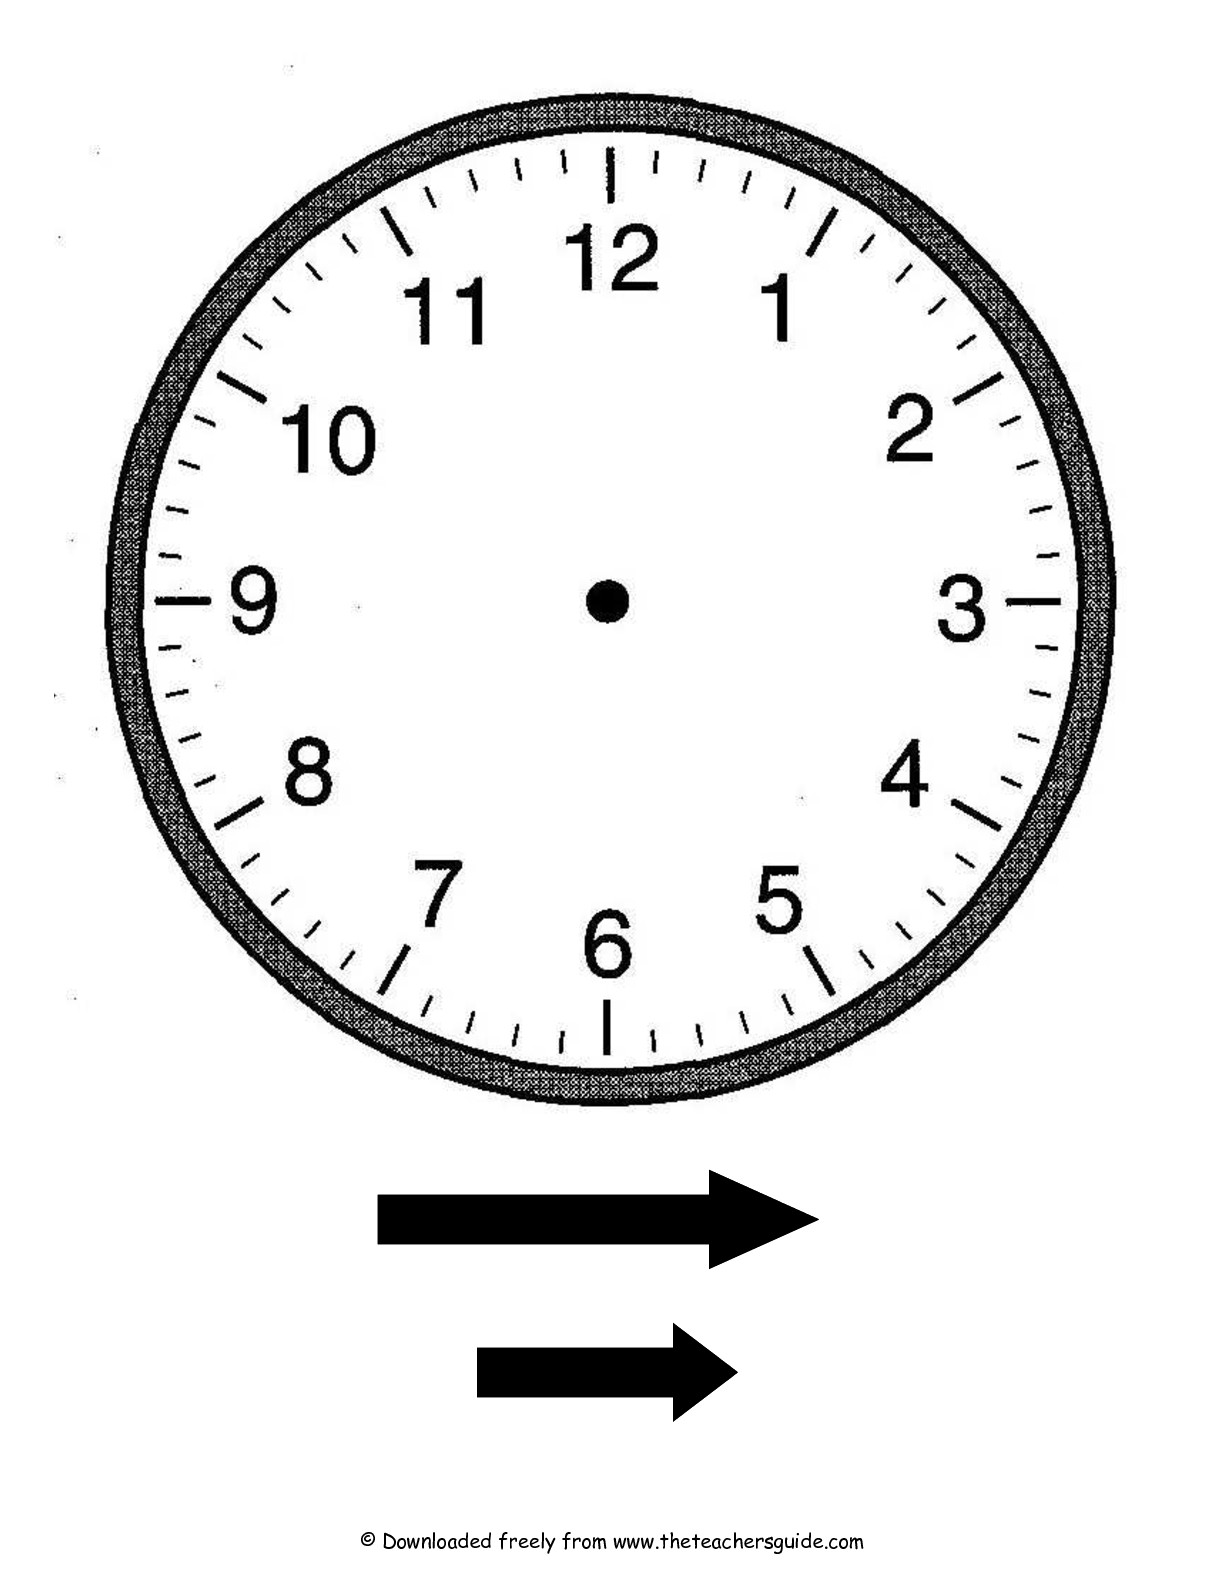 Clock Faces without Hands Worksheets Image